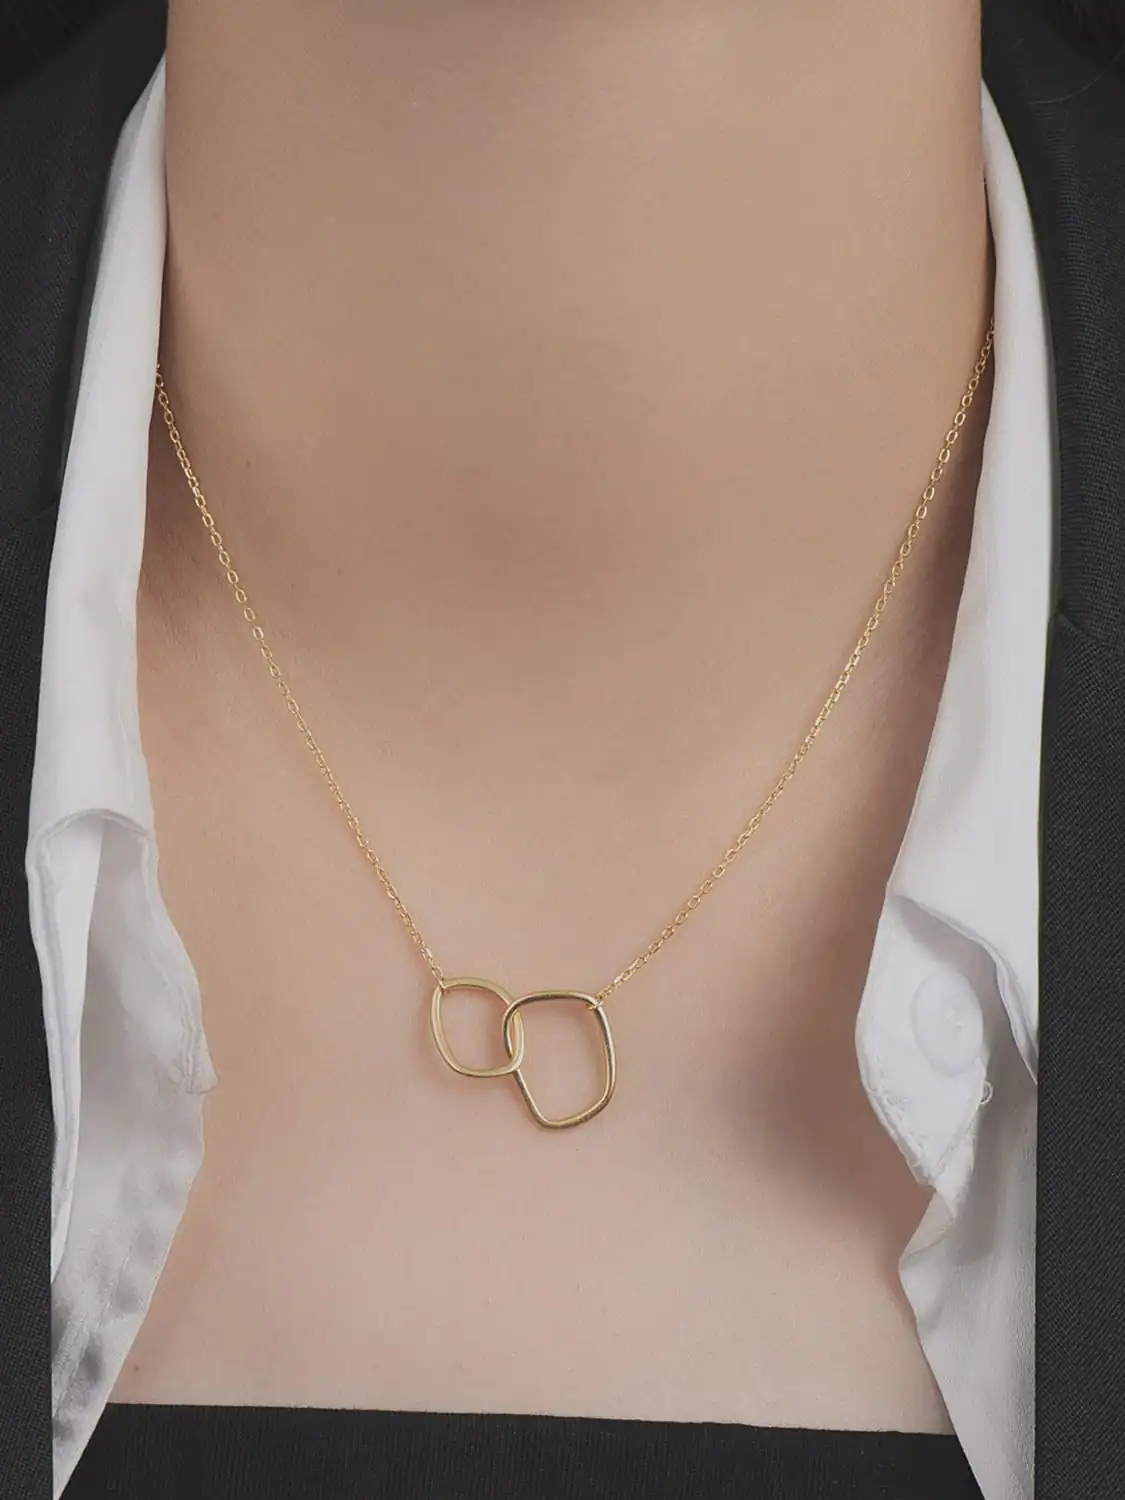 Diamond Cluster Necklace in 14k Gold – Alef Bet by Paula